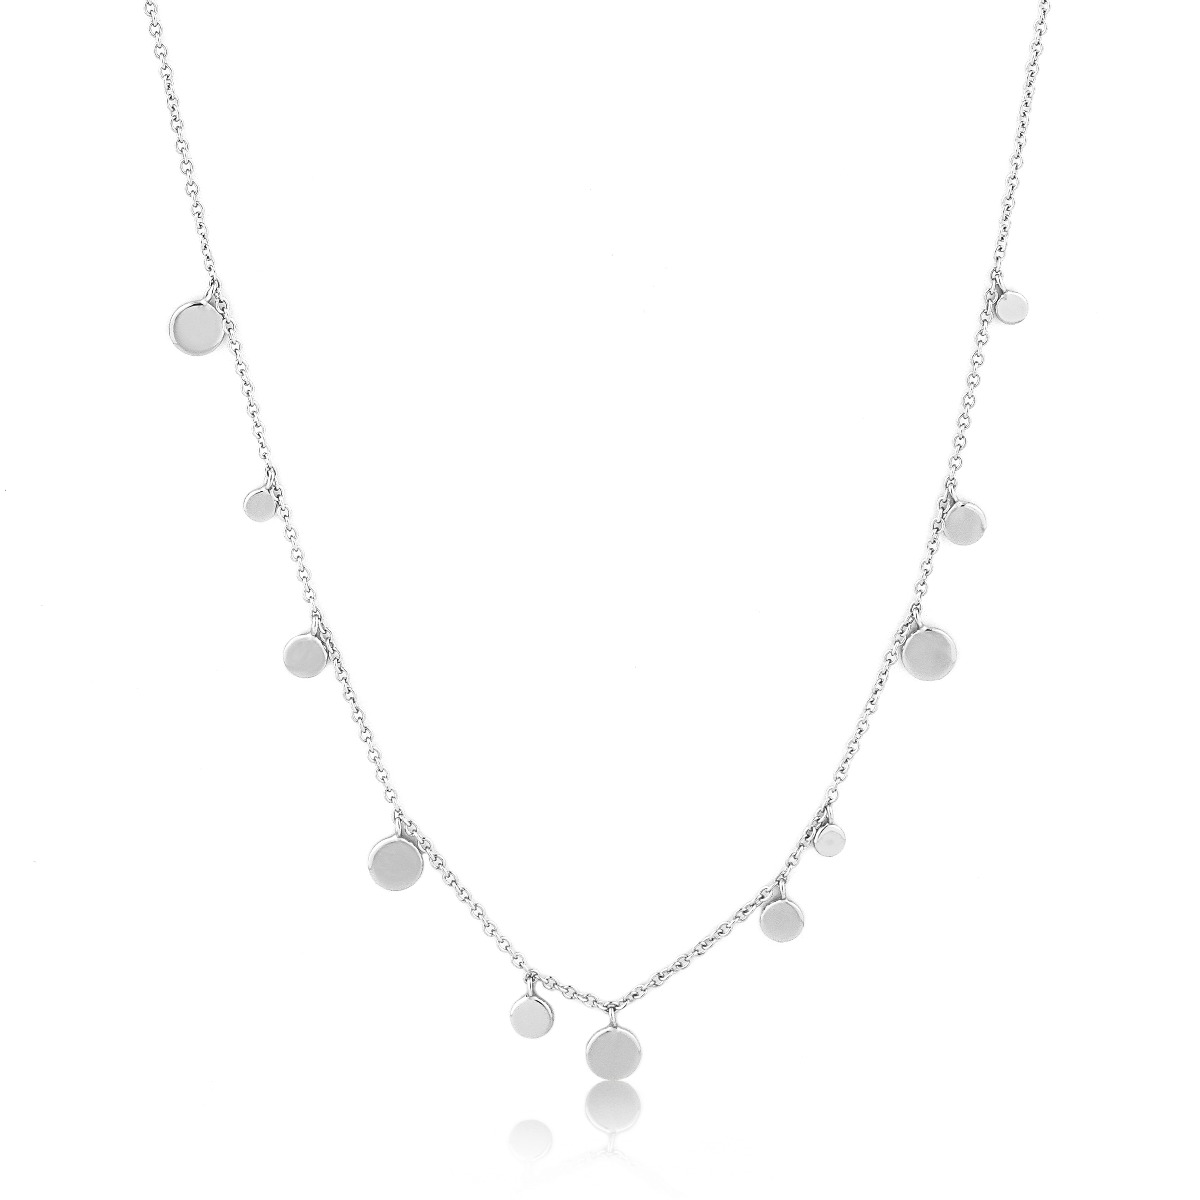 Ania Haie Geometry Mixed Discs Necklace